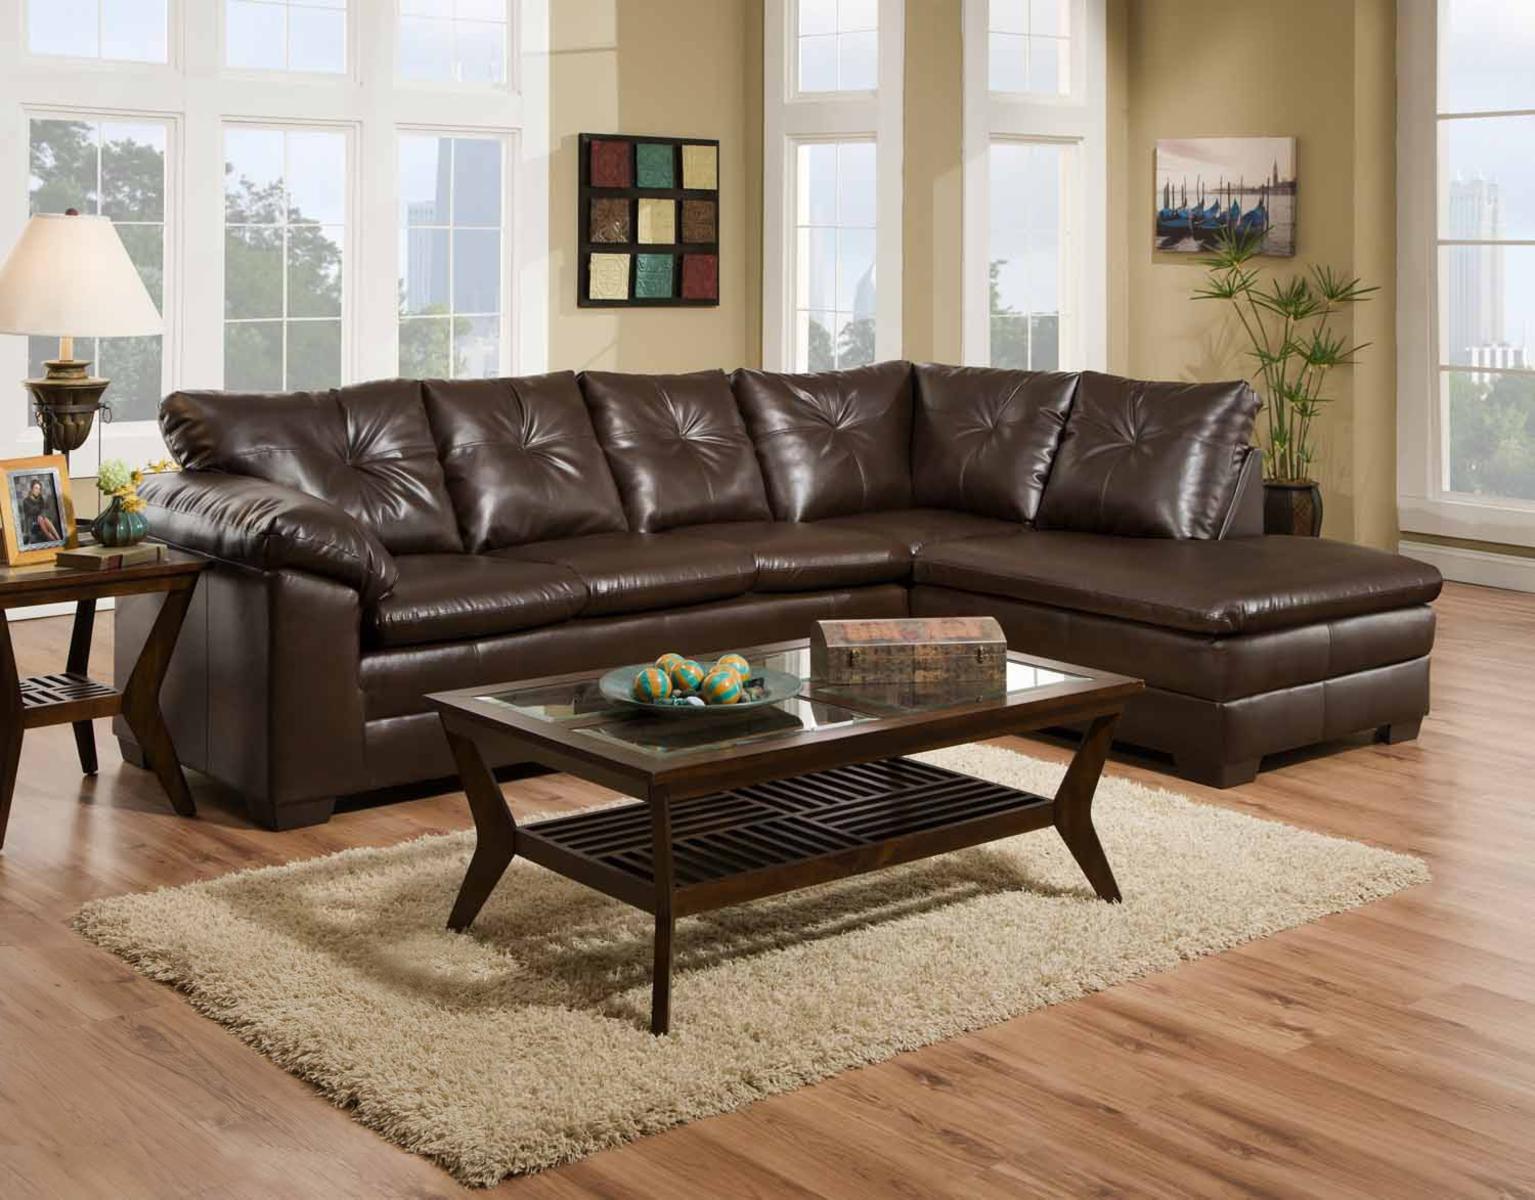 117" X 82" X 39" Cowboy Brown 83% Polyurethane/17% Bonded Leather 2 pc Sectional